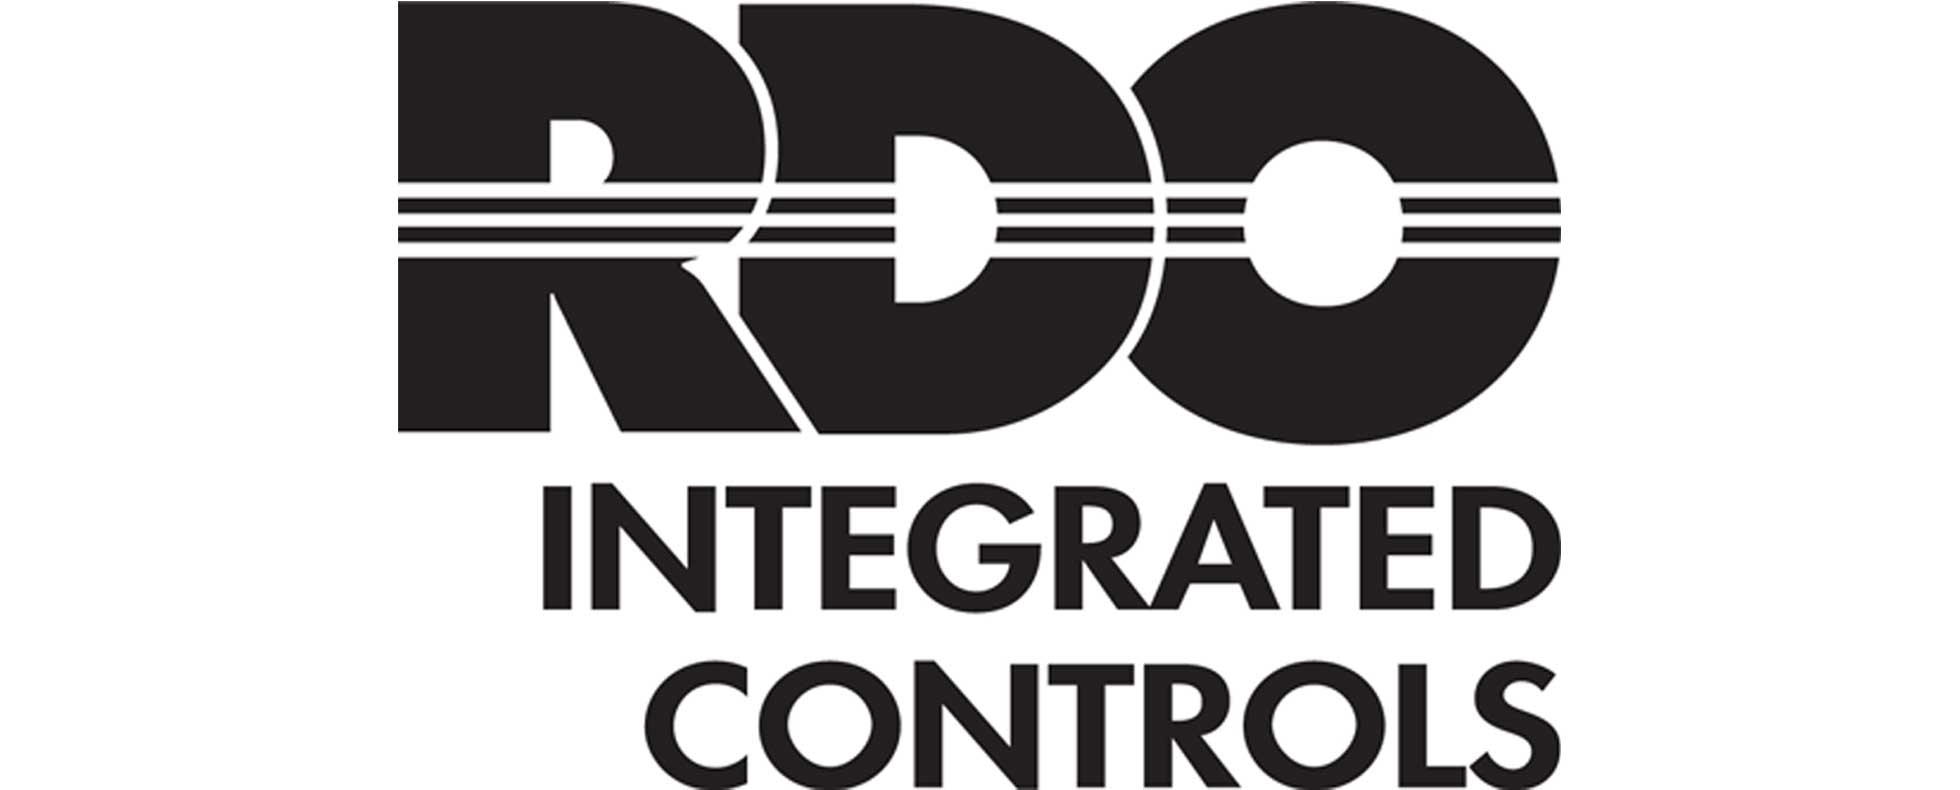 RDO Integrated Controls Expands Partnership with Topcon